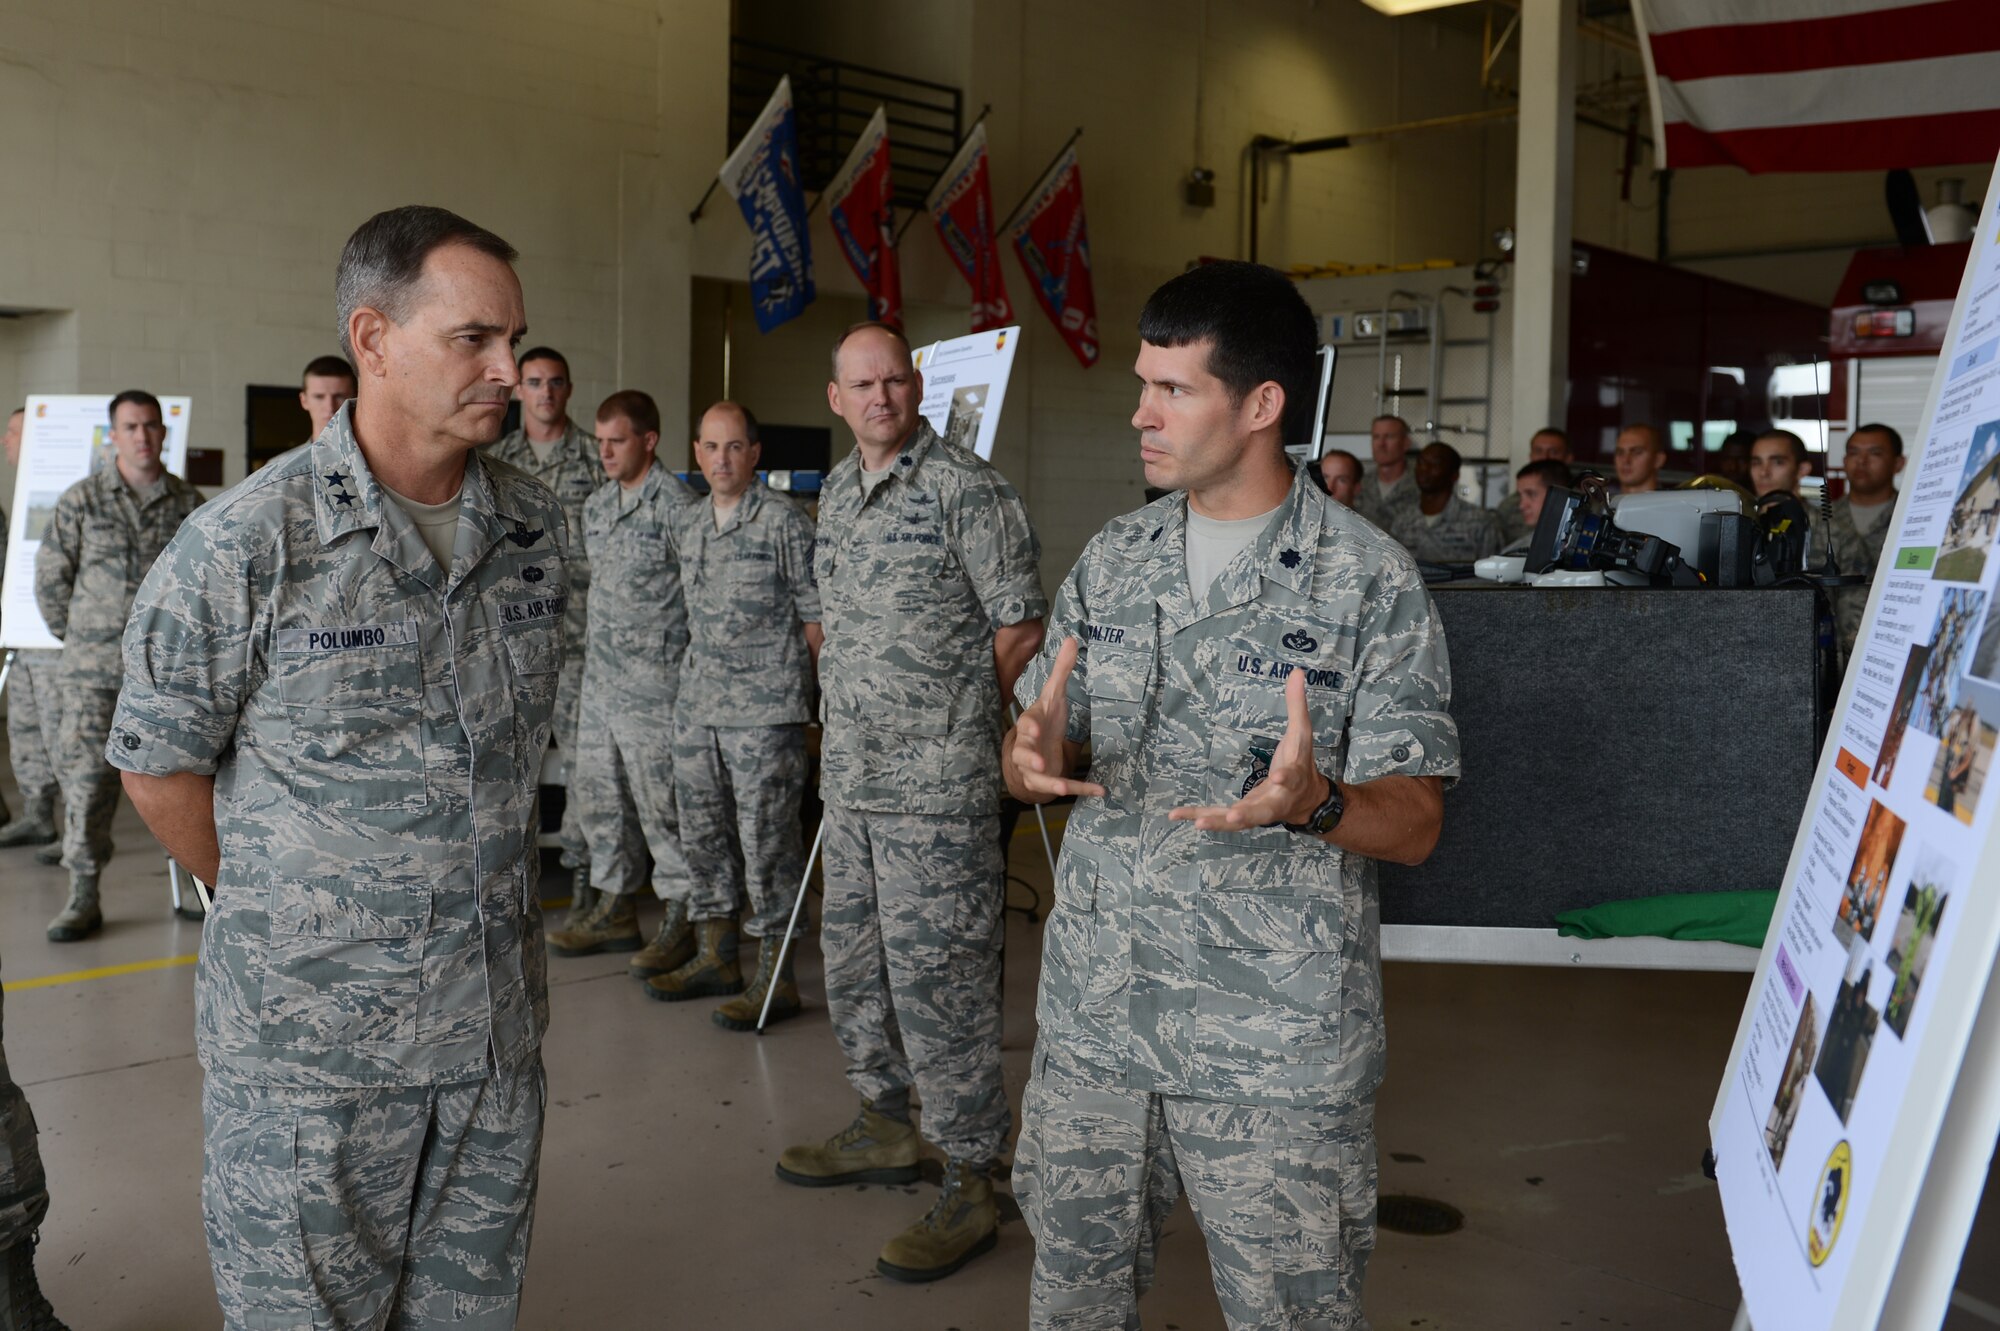 Lt. Col. Terrence Walter, 20th Civil Engineer Squadron commander, briefs Maj. Gen. Jake Polumbo, 9th Air Force commander, about his unit’s mission and capabilities at the fire department at Shaw Air Force Base, S.C., July 1, 2013. Polumbo toured the 20th Fighter Wing and visited multiple units that compose it. (U.S. Air Force photo by Airman 1st Class Krystal M. Jeffers/Released)